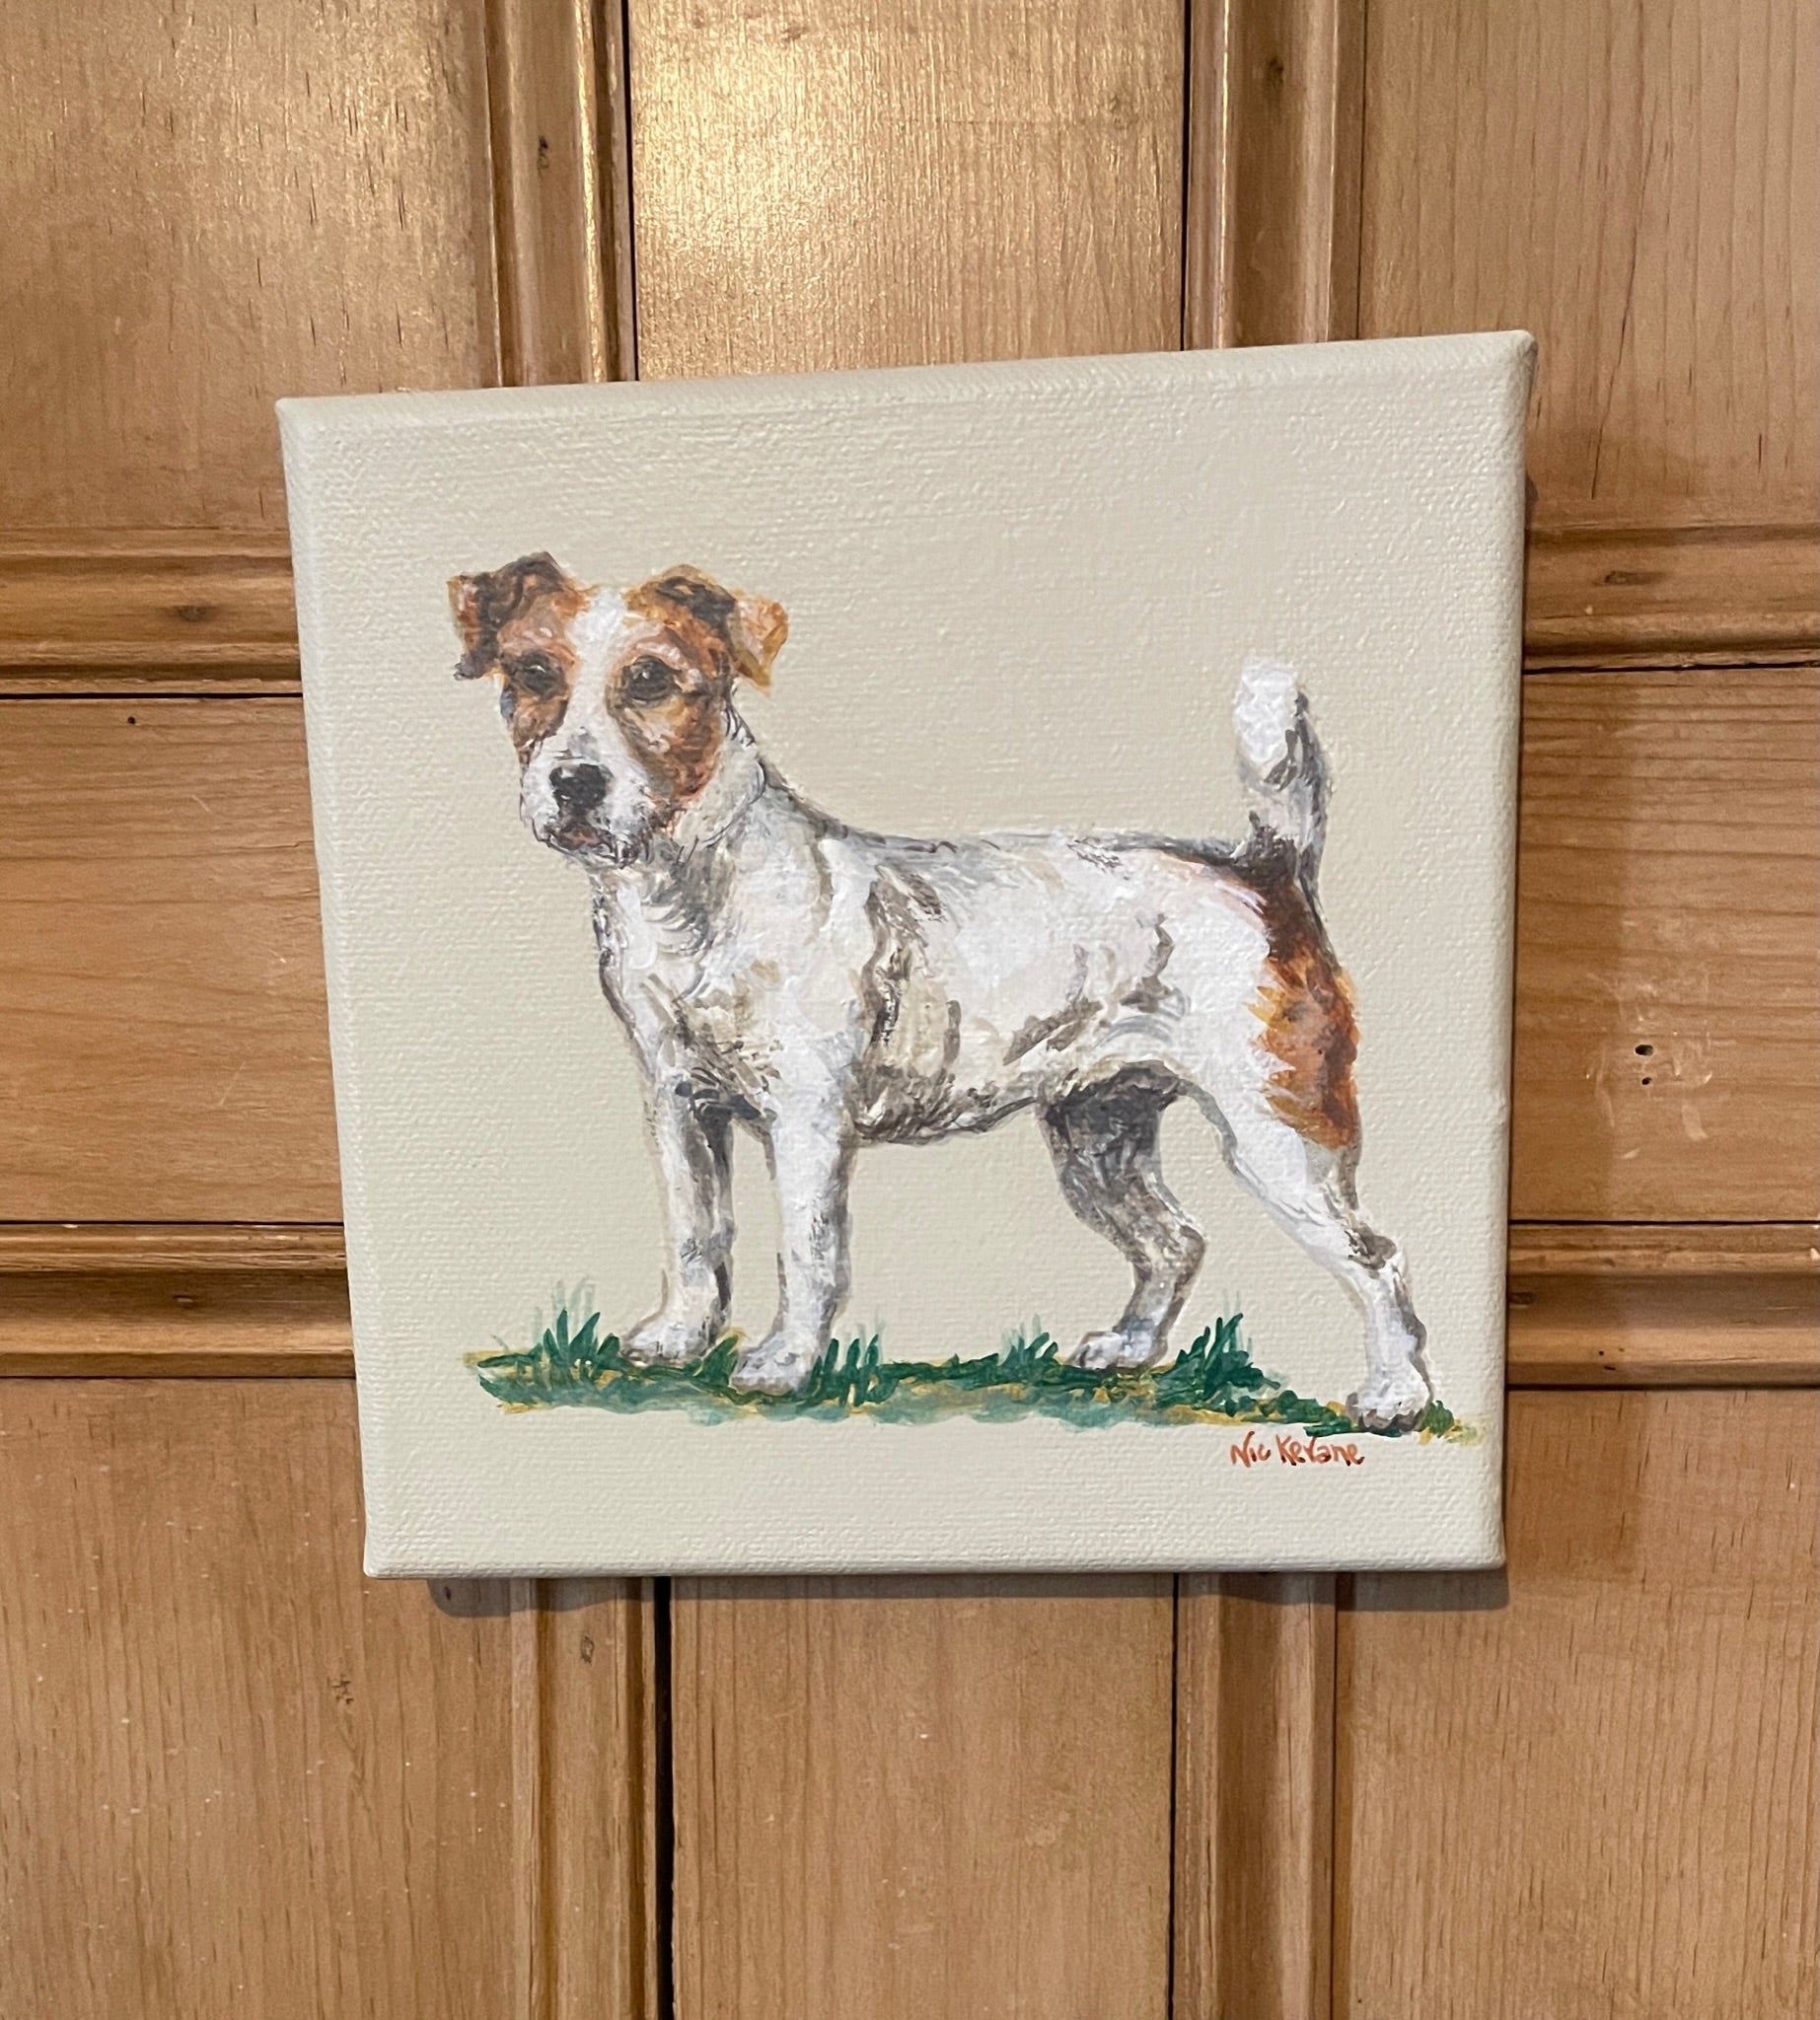 Jack Russell - 15cm x 15cm mini paintings depicting various countryside subjects.